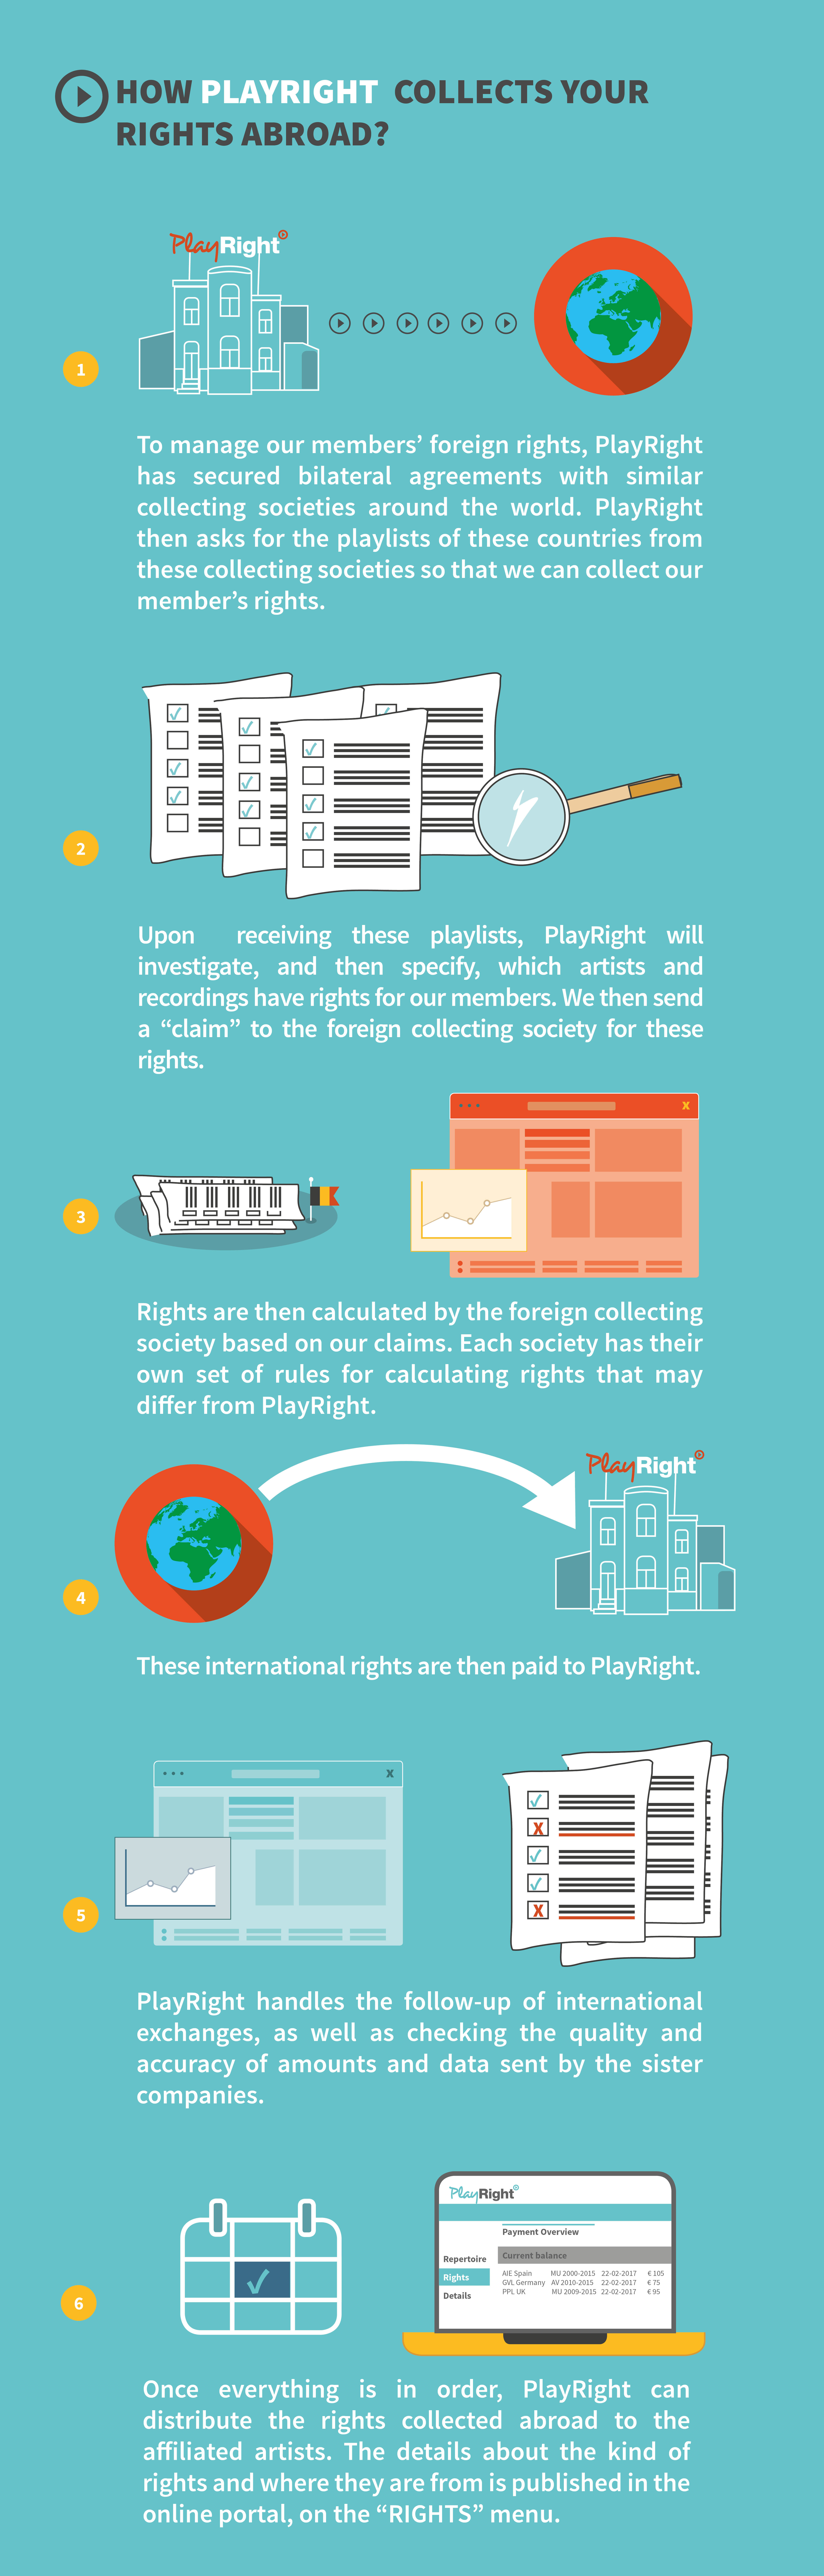 Your rights abroad in pictures